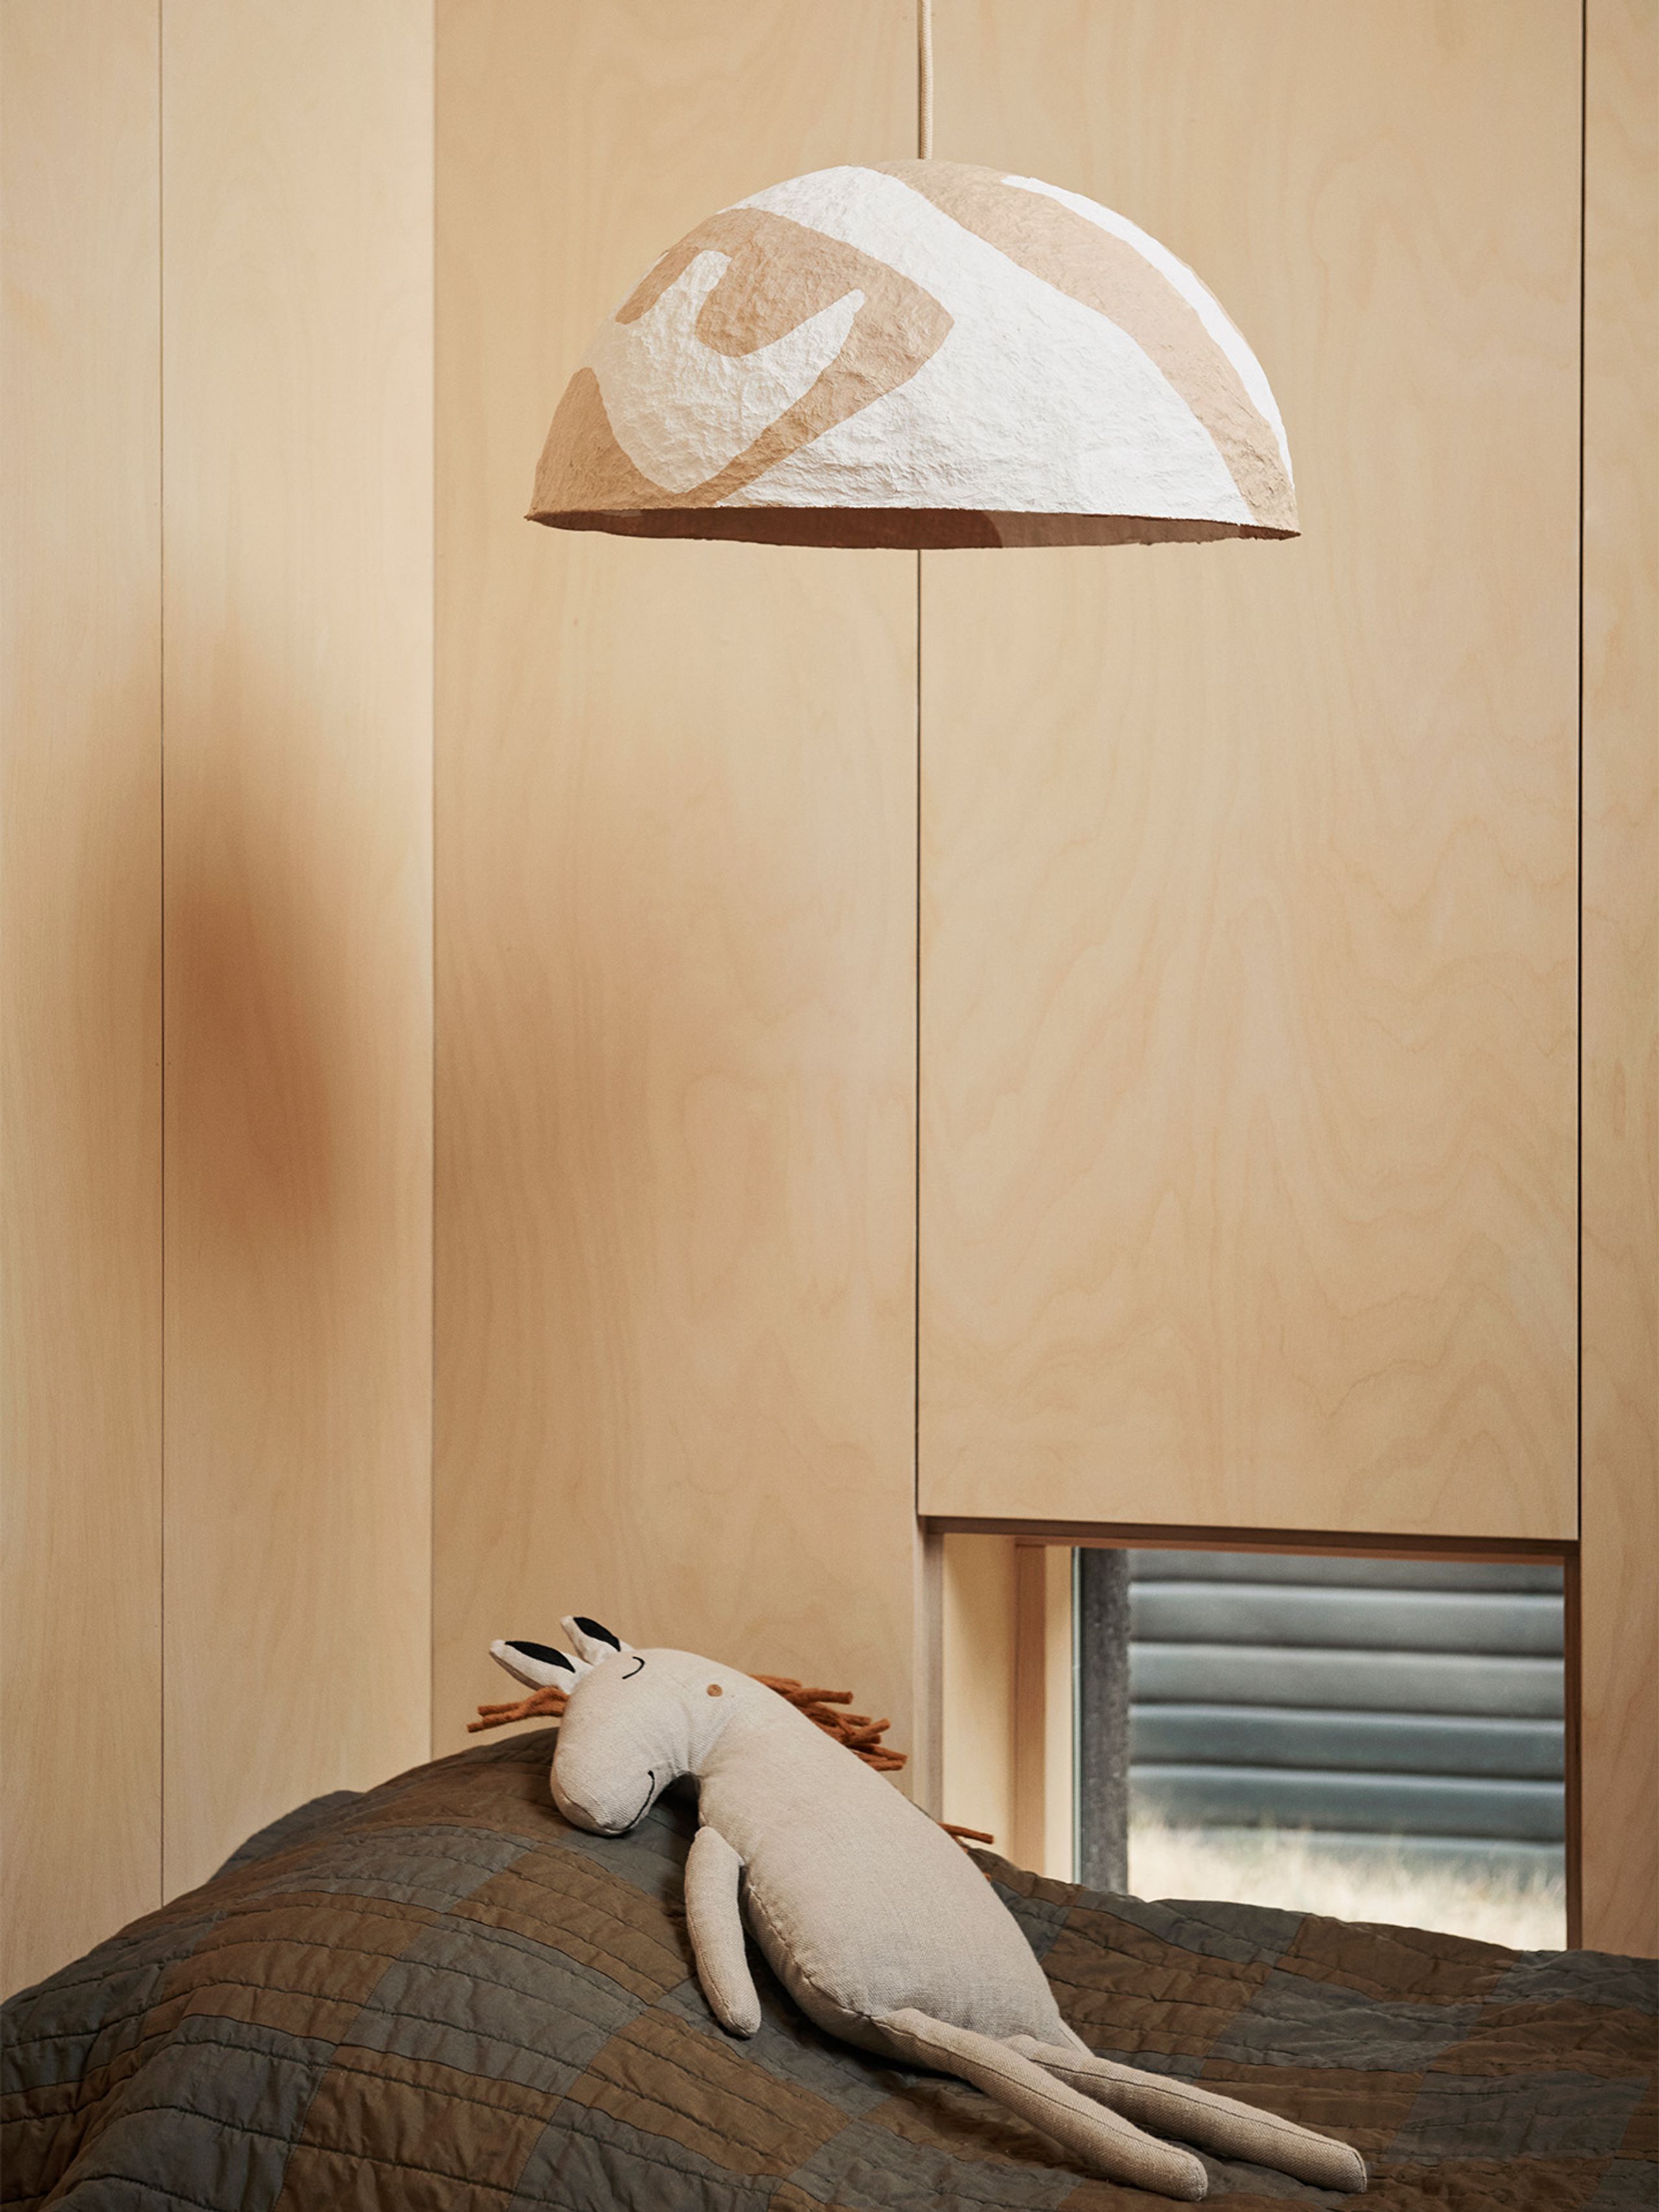 Ferm Living - Lampeskærm - Half Dome Lampshade - Half Dome Lampshade - Cave